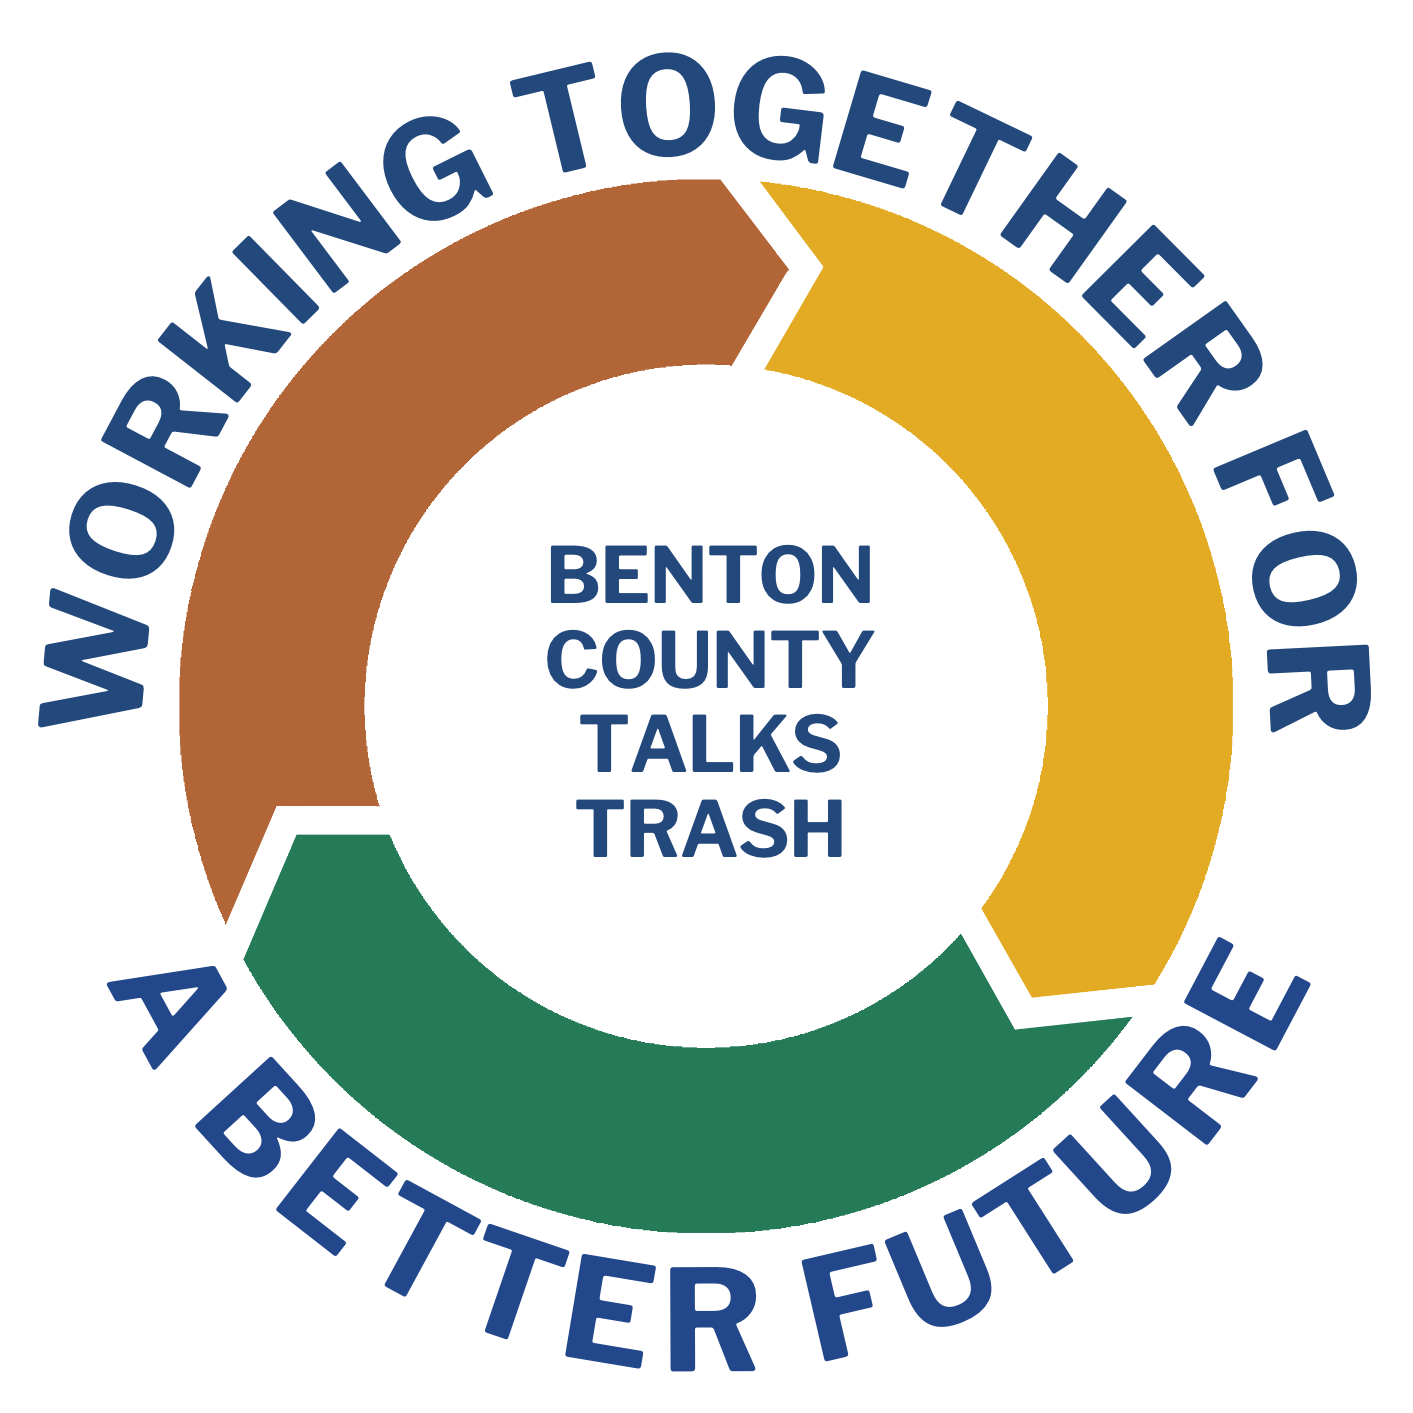 Working together for a better future, Benton County Talks Trash.